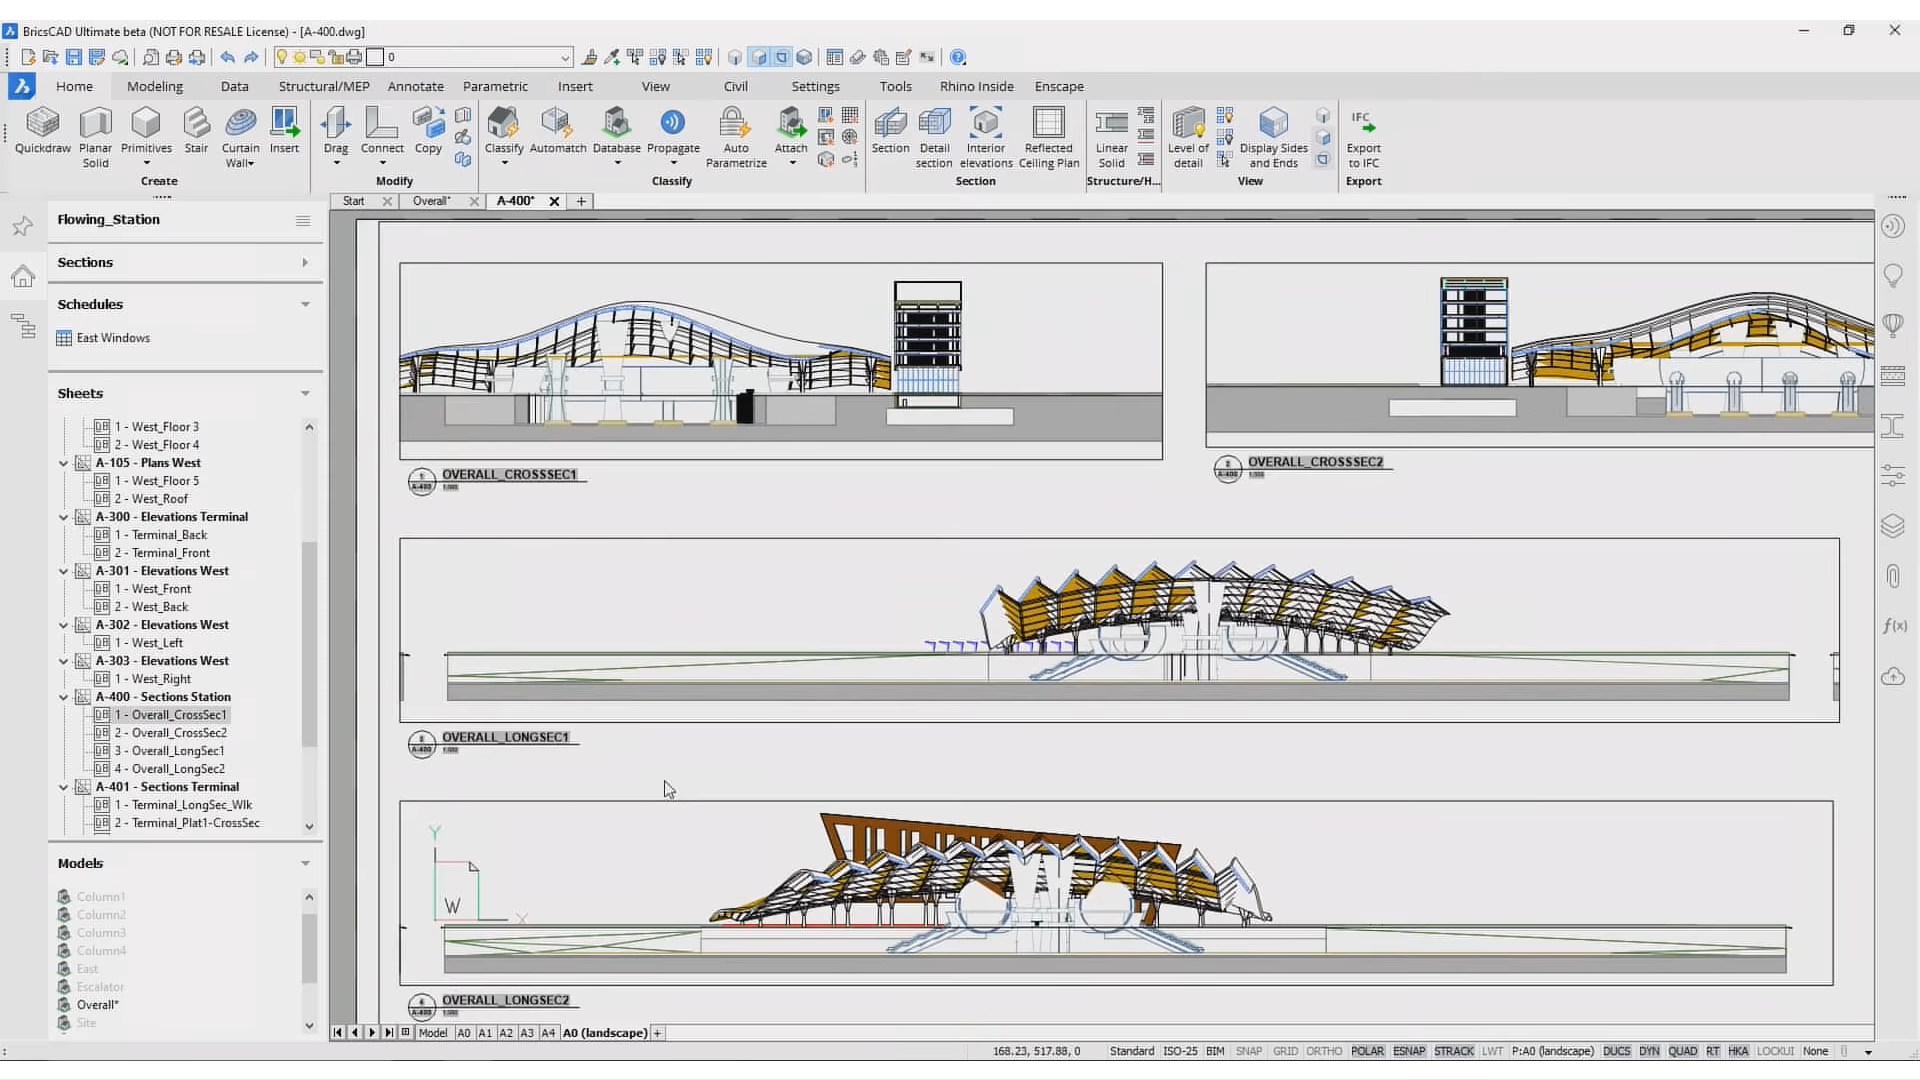 BricsCad Ultimate 23.2.06.1 download the new for mac